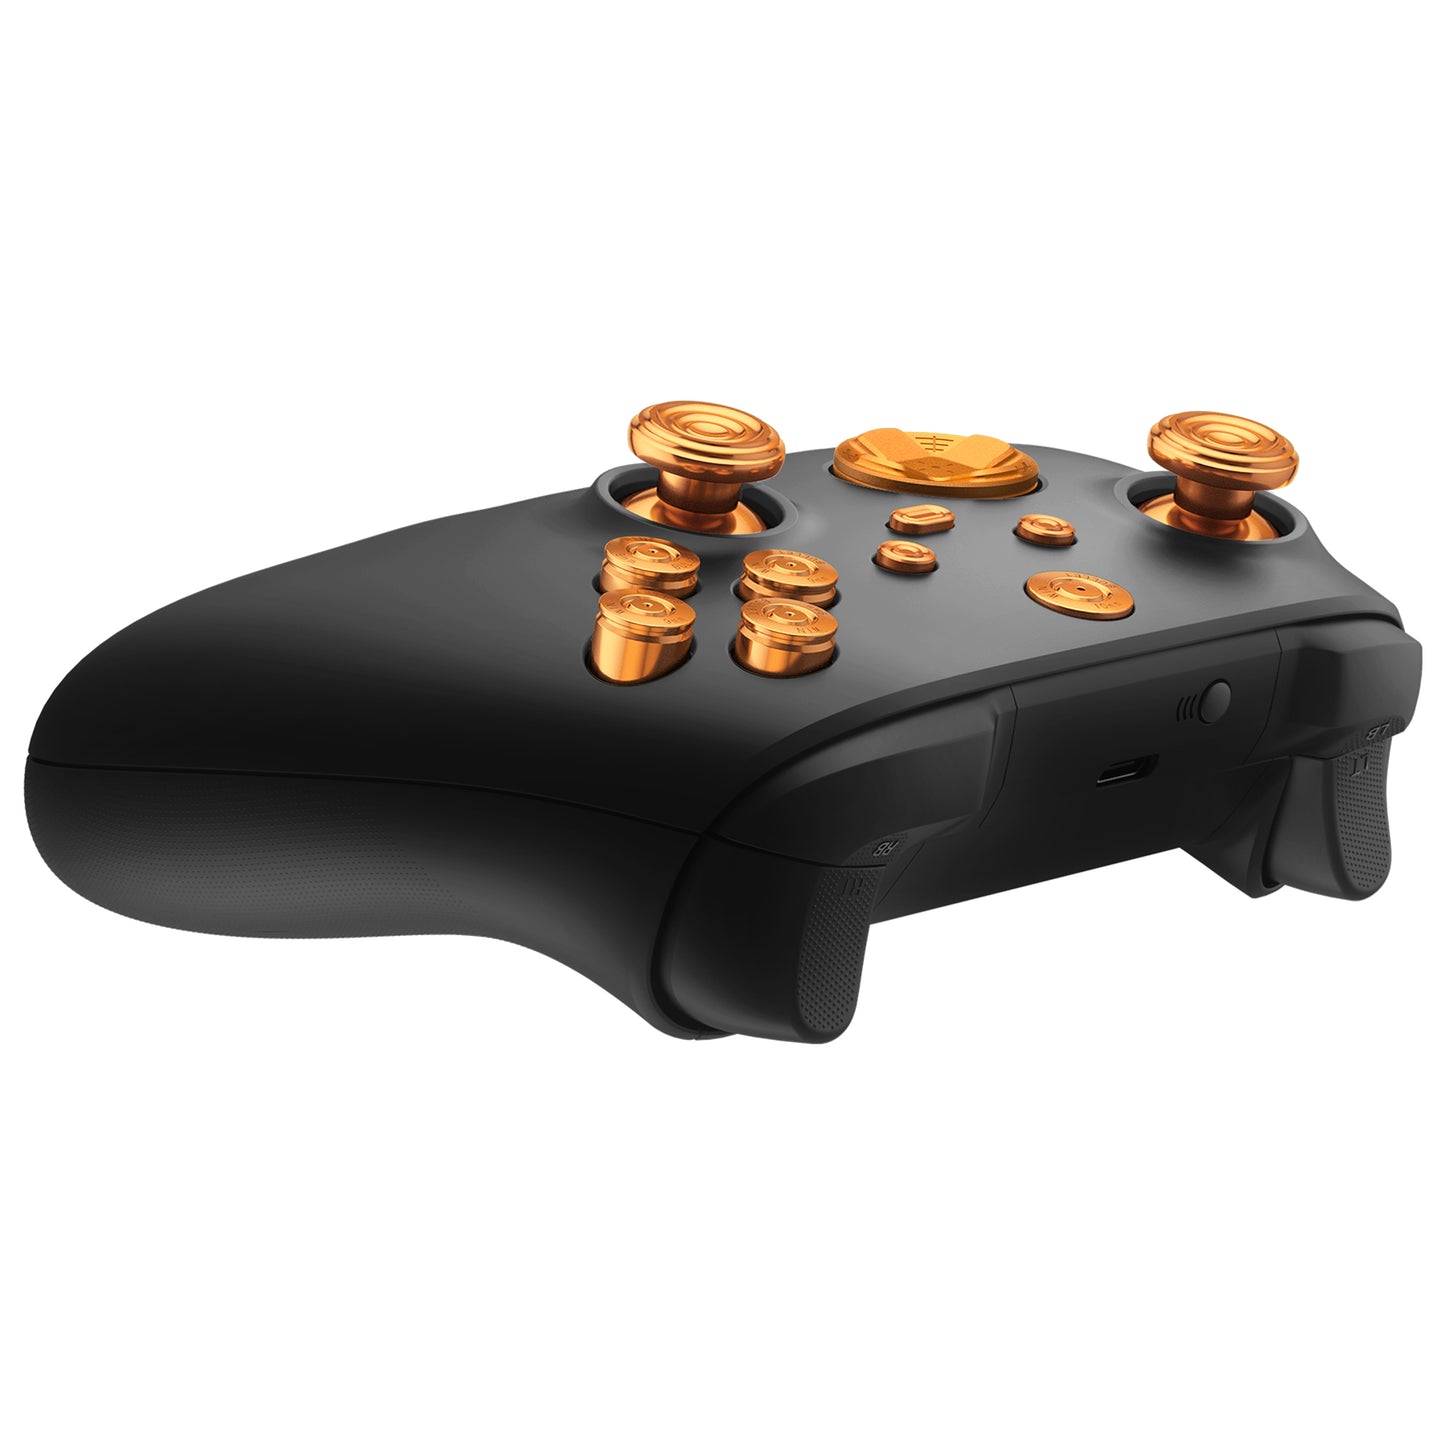 eXtremeRate Retail eXtremeRate 11 in 1 Custom Gold Metal Buttons for Xbox Series X/S Controller, Aluminum Alloy Dpad Start Back Share Button, Replacement Thumbsticks, Home ABXY Bullet Buttons for Xbox Core Controller - JX3E001